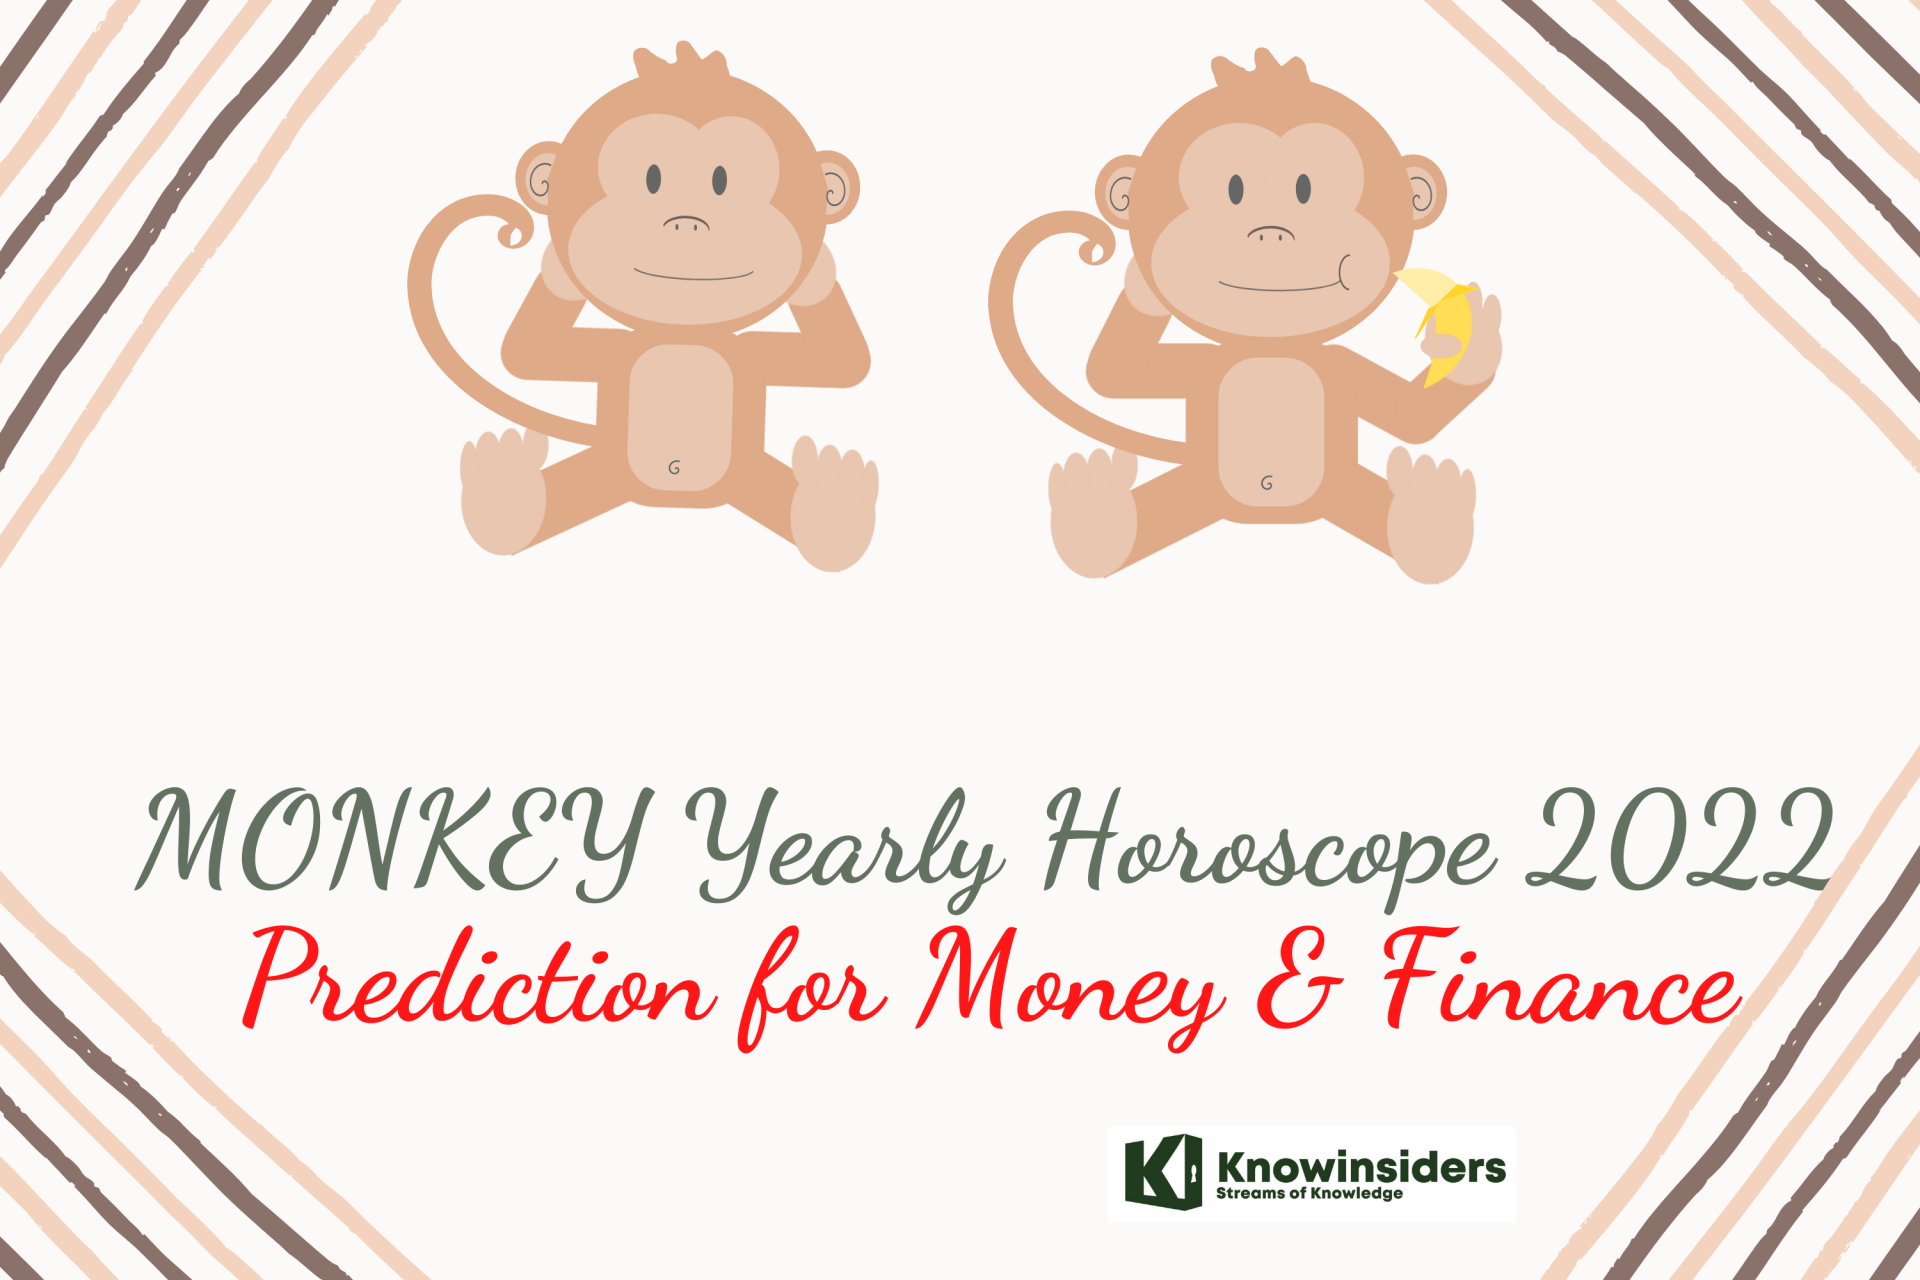 MONKEY Yearly Horoscope 2022 – Feng Shui Prediction for Money & Finance